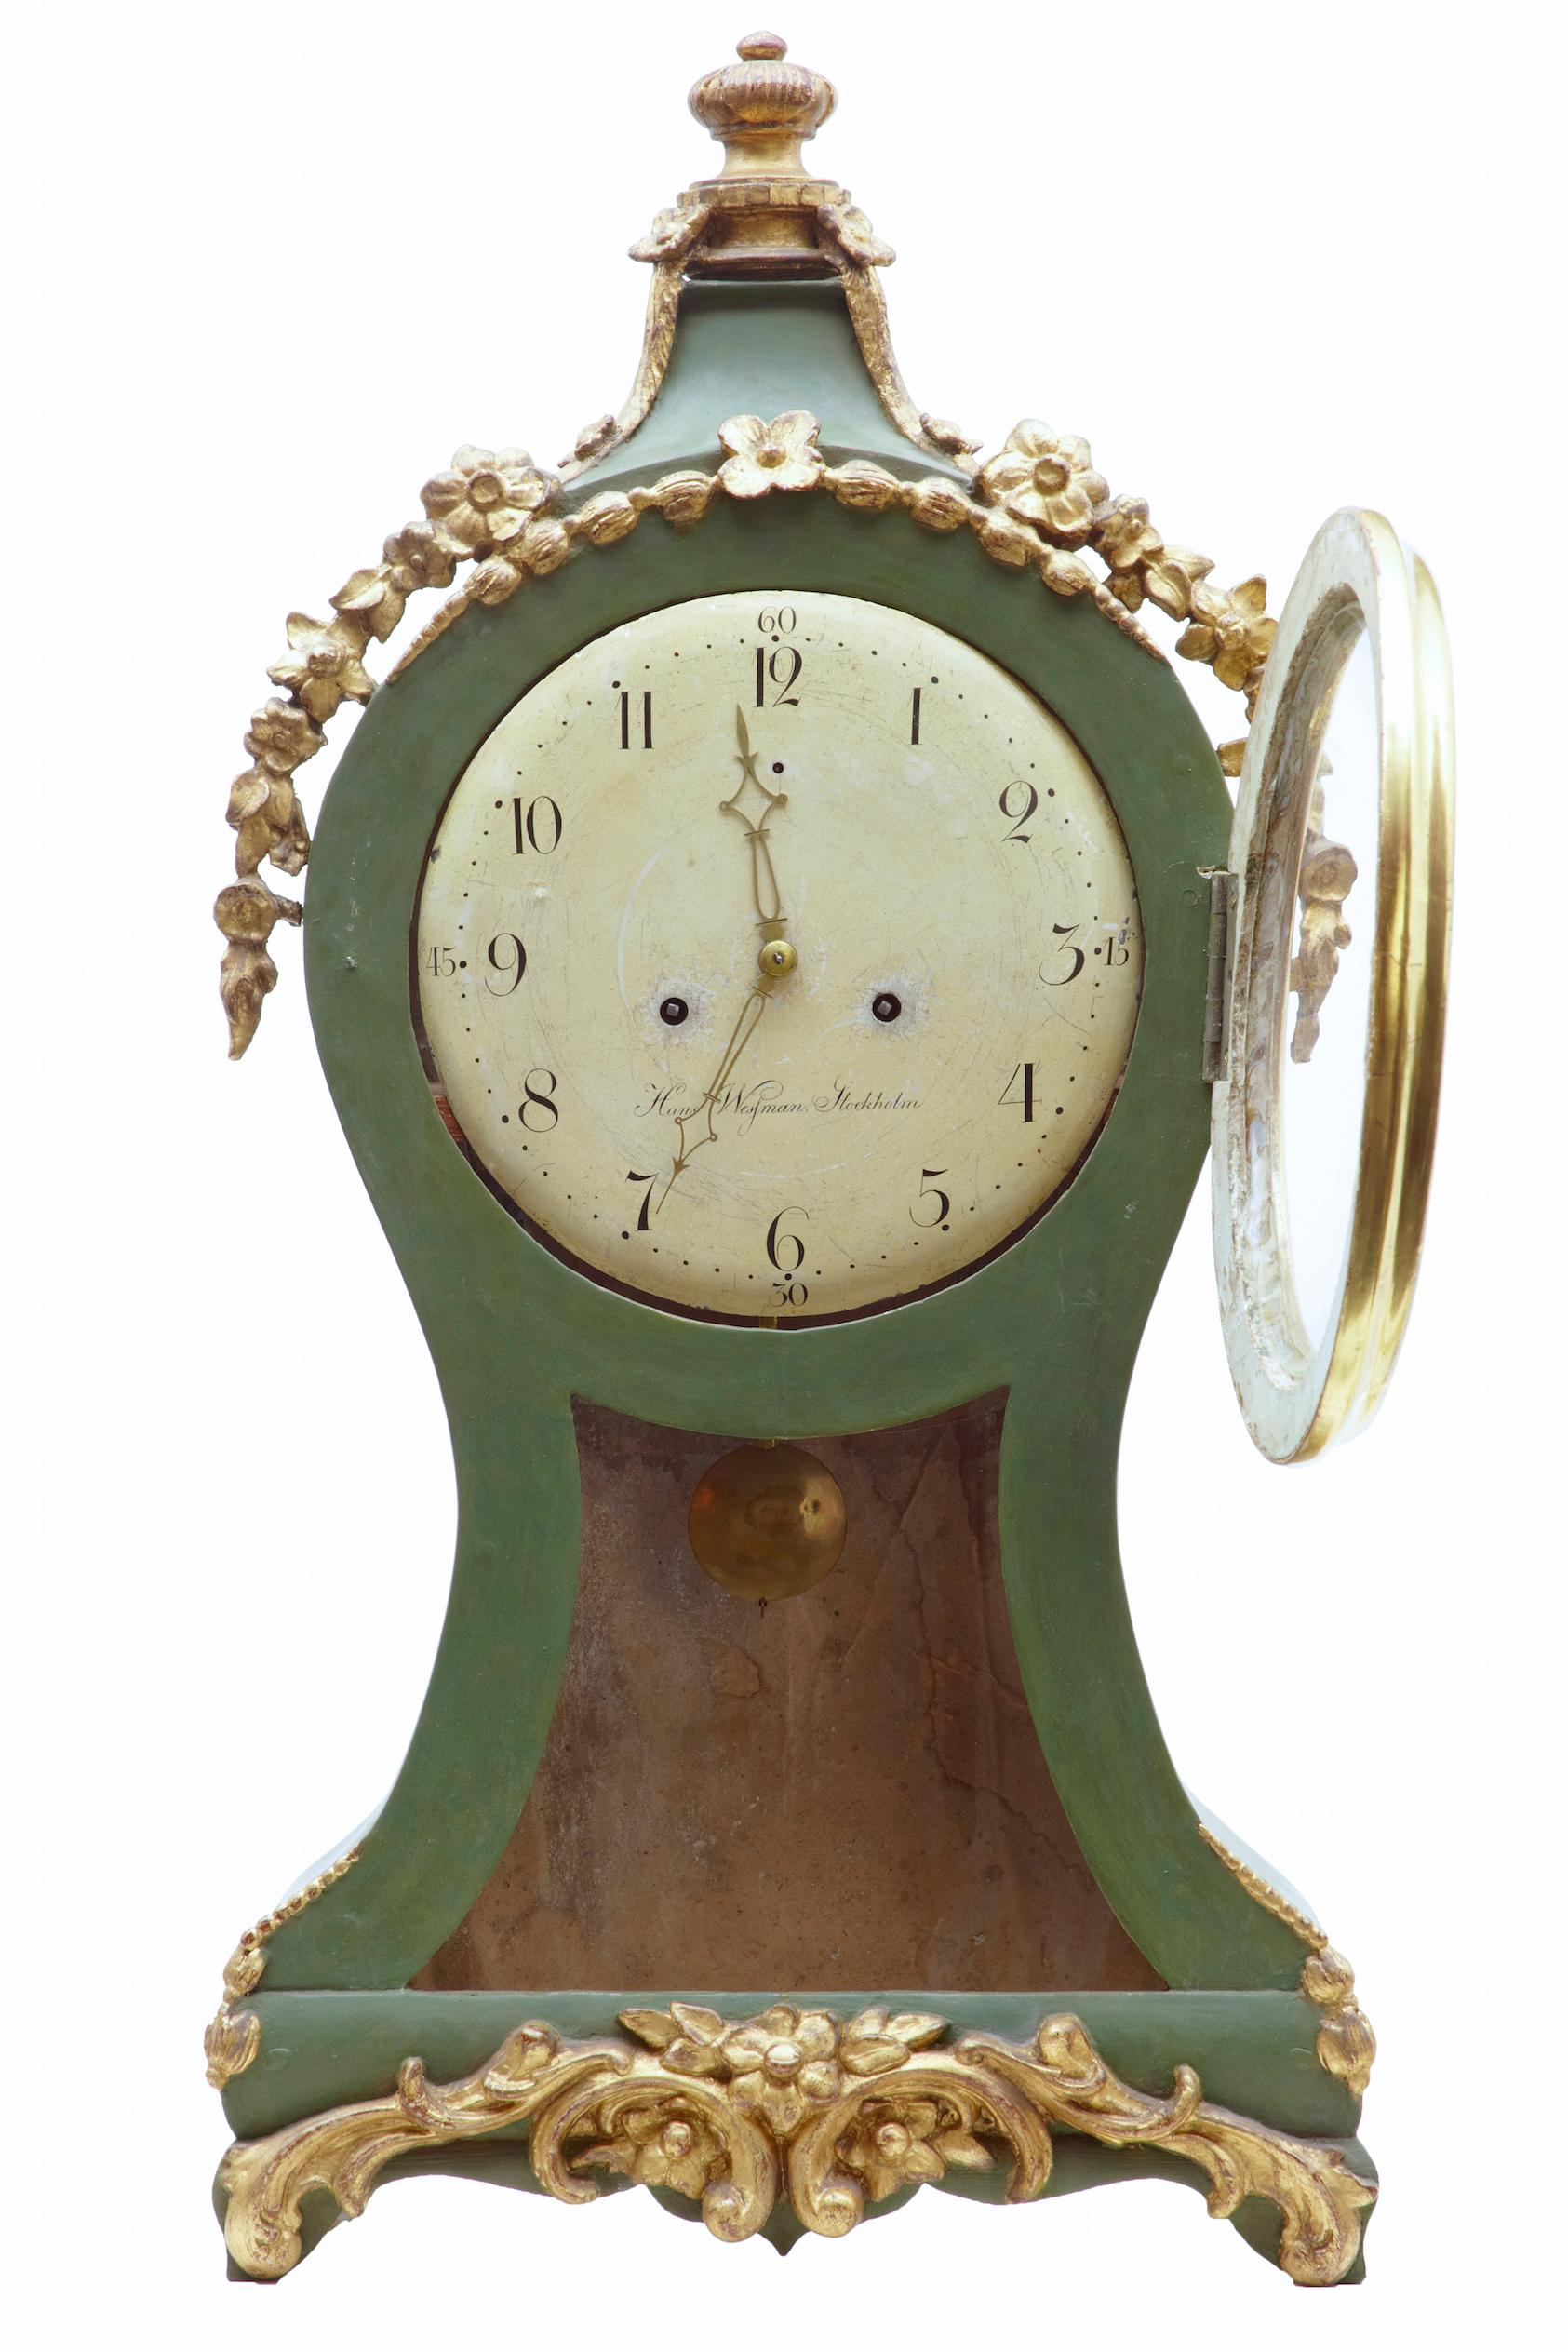 18th century Swedish gilt and painted mantle clock, circa 1790.

Fine quality Swedish clock in original condition. Original green paint with gilt carved wood decoration, a real fine quality piece. Clock face signed hans westman,